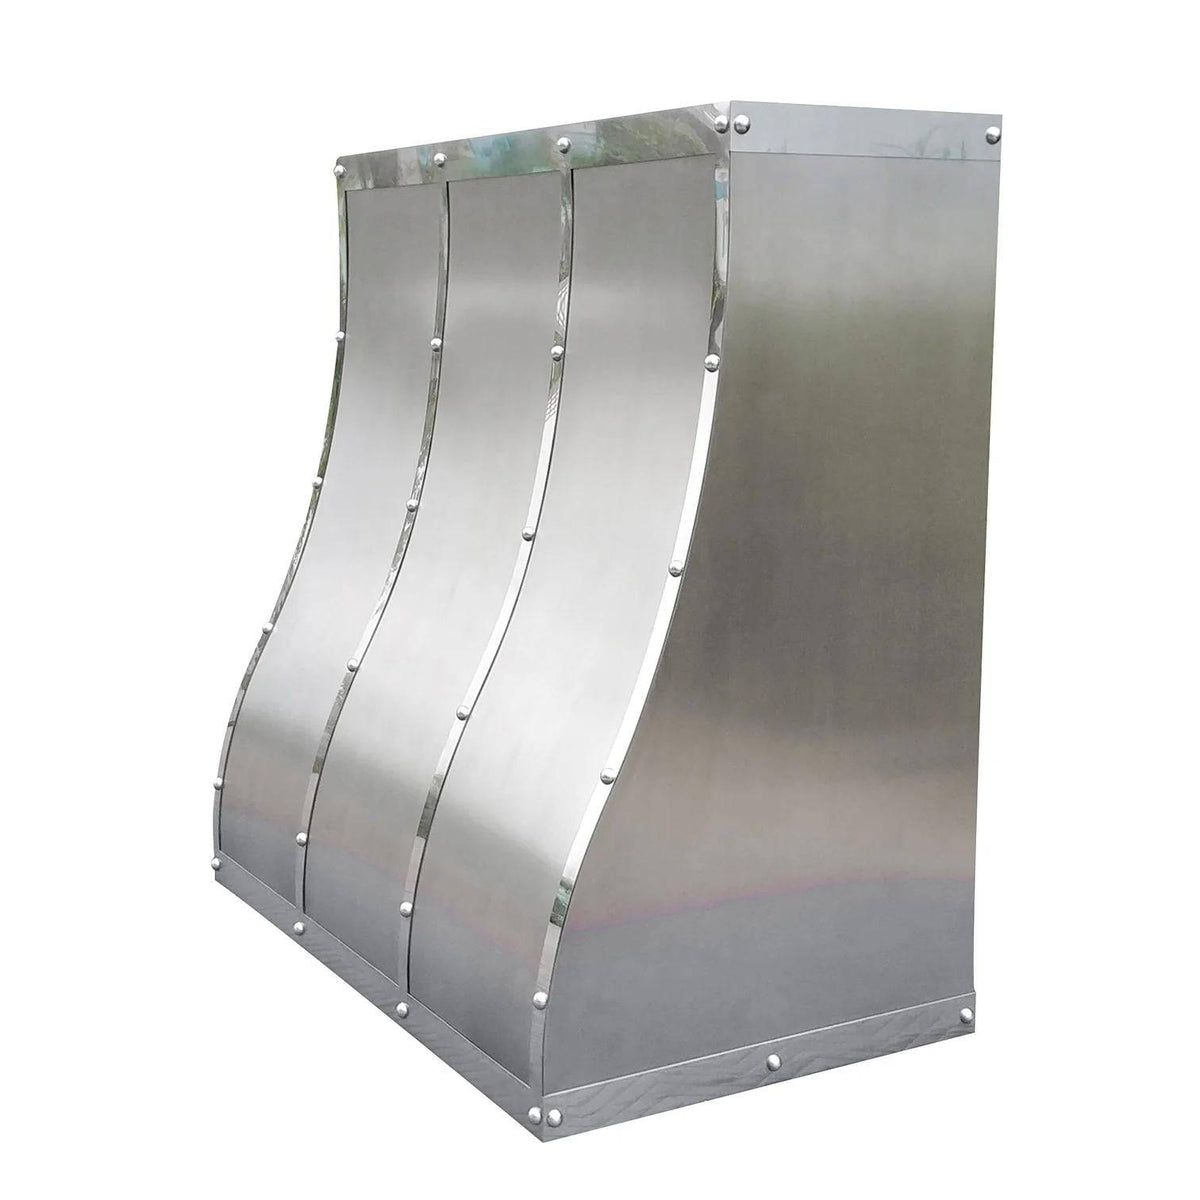 Fobest Custom Handcrafted Stainless Steel Range Hood FSS-109 - Stainless Steel Range Hood-Fobest Appliance